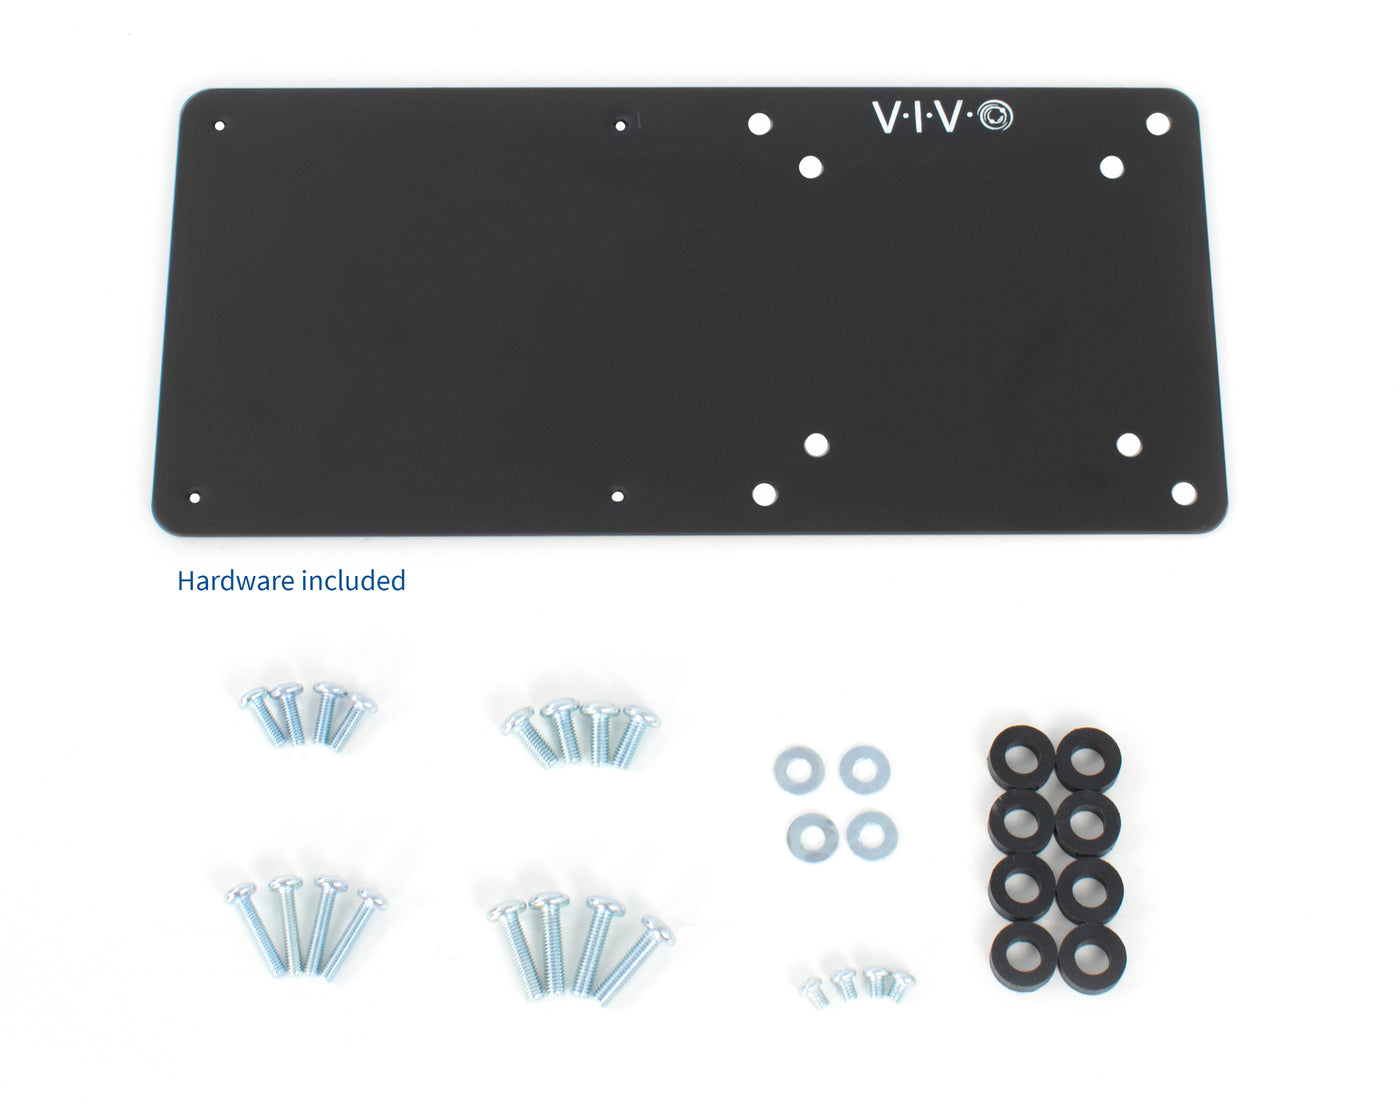 Sturdy steel VESA plate with all necessary hardware included.